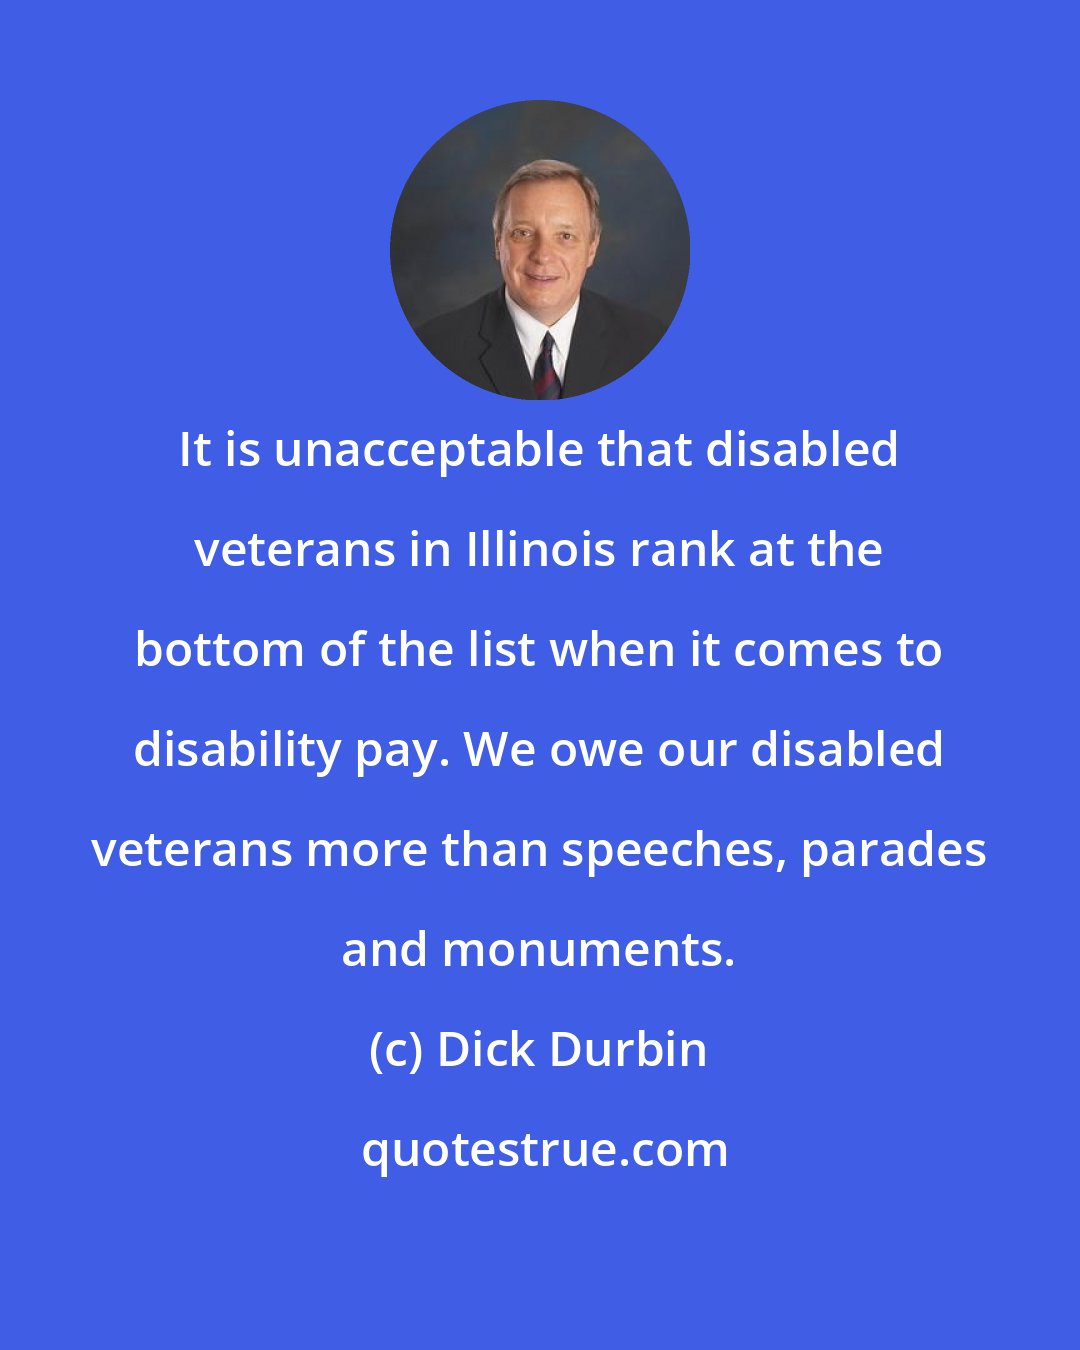 Dick Durbin: It is unacceptable that disabled veterans in Illinois rank at the bottom of the list when it comes to disability pay. We owe our disabled veterans more than speeches, parades and monuments.